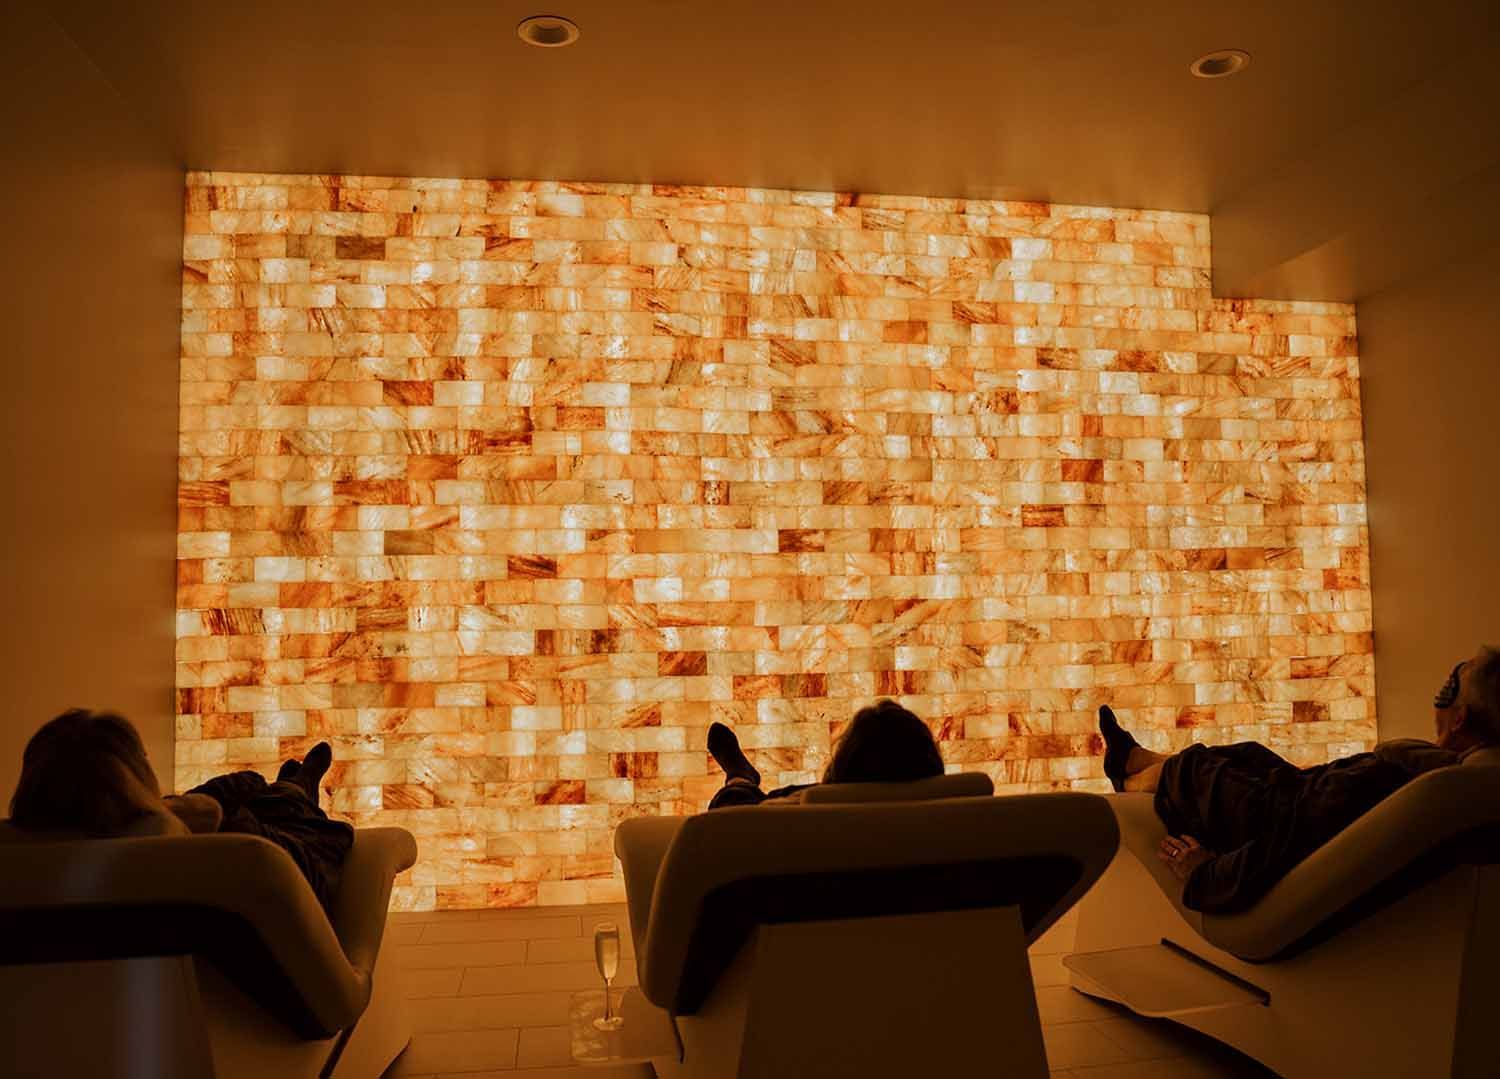 People relaxing in front of the salt wall at salt lounge in Avon